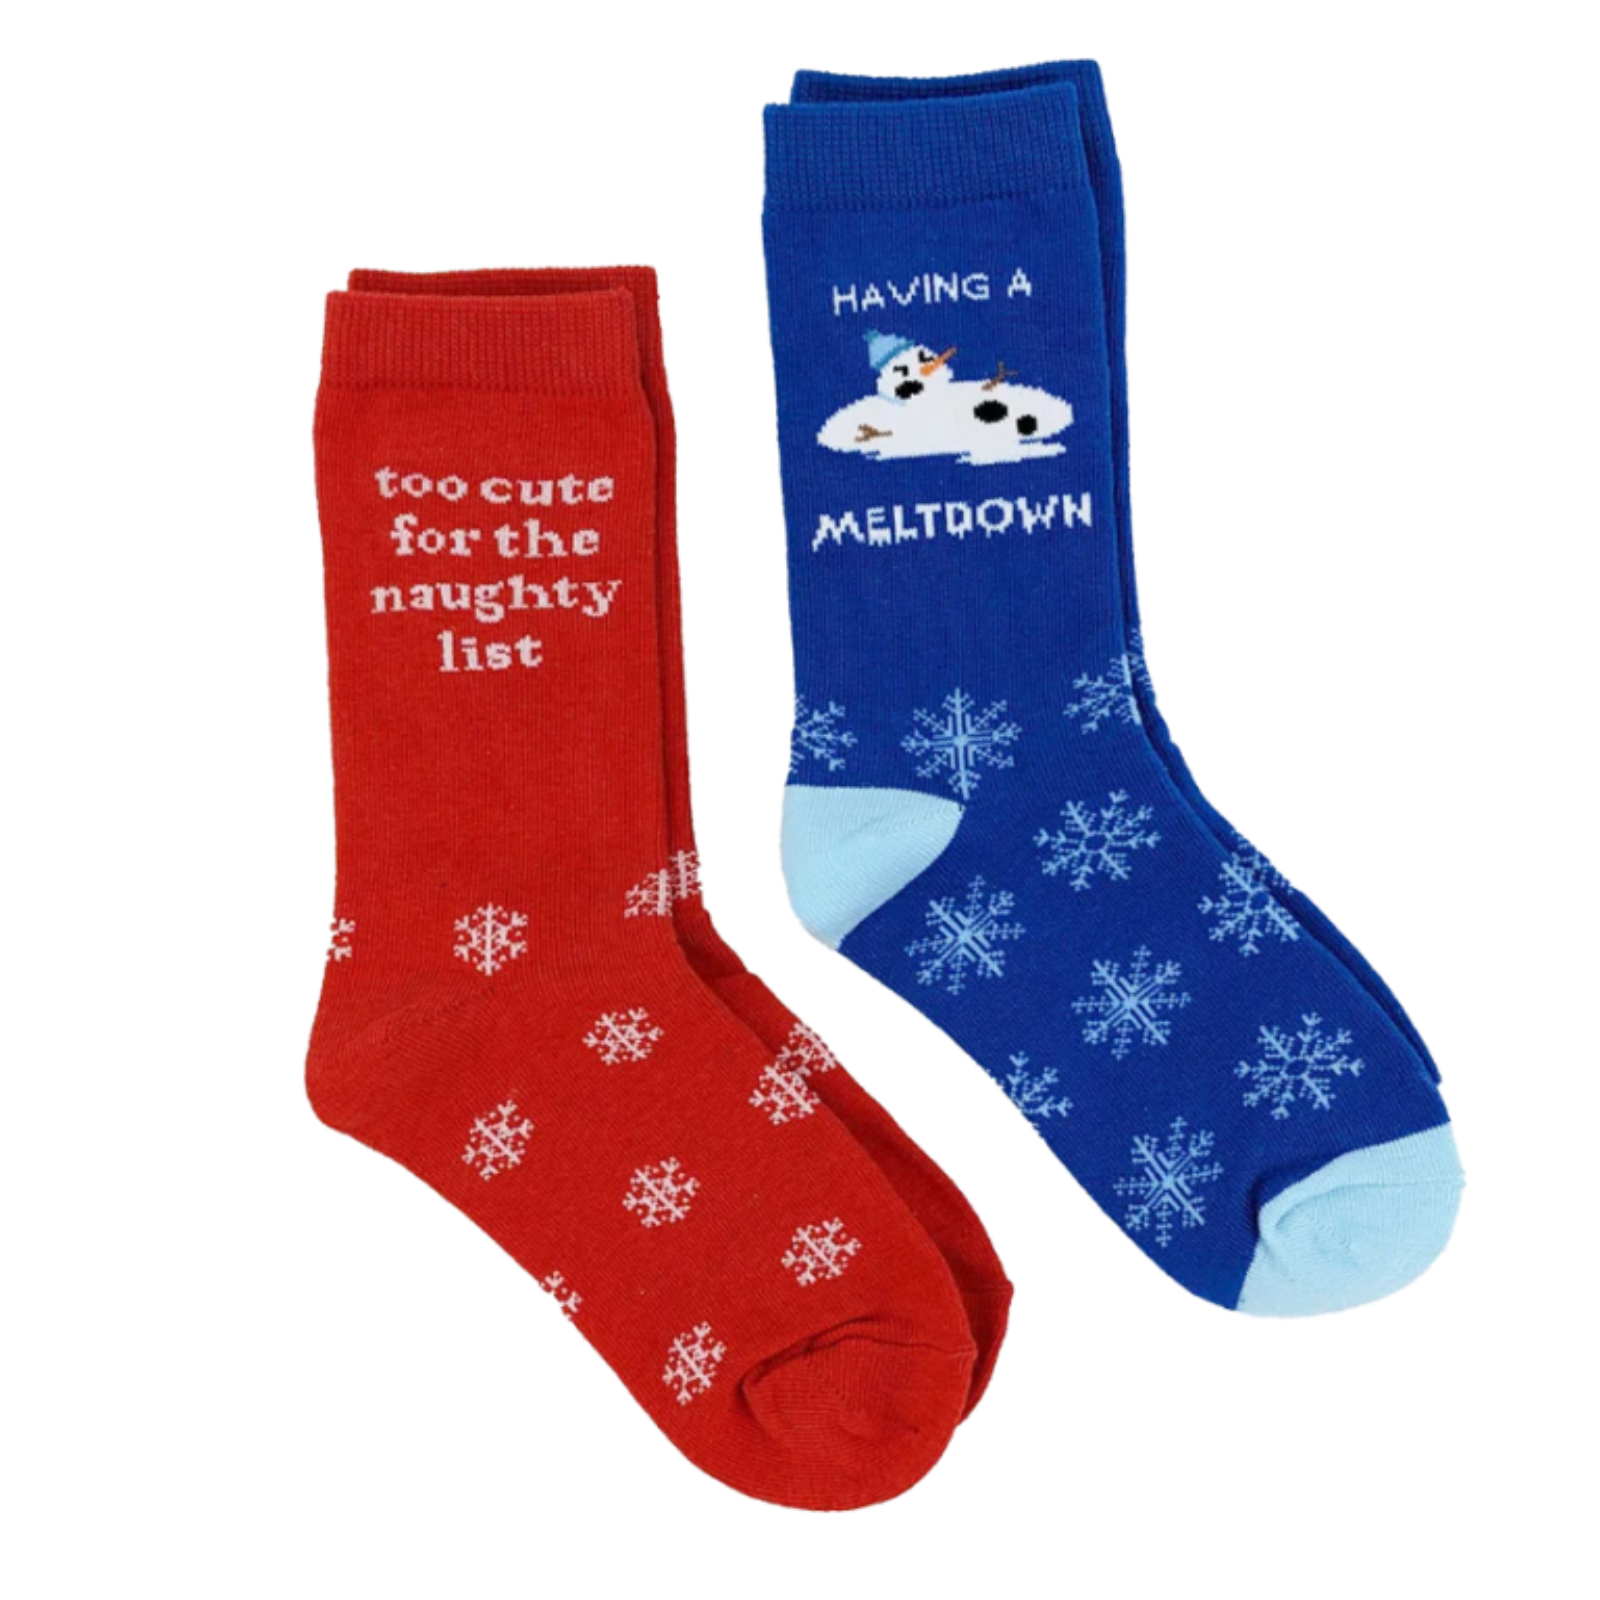 Sock Harbor Holiday 2-pack kids' crew socks featuring red sock with snowflakes that says "Too cute for the naughty list" and blue sock with snowflakes and melting snowman that says "Having a meltdown". Socks shown laying flat on display. 